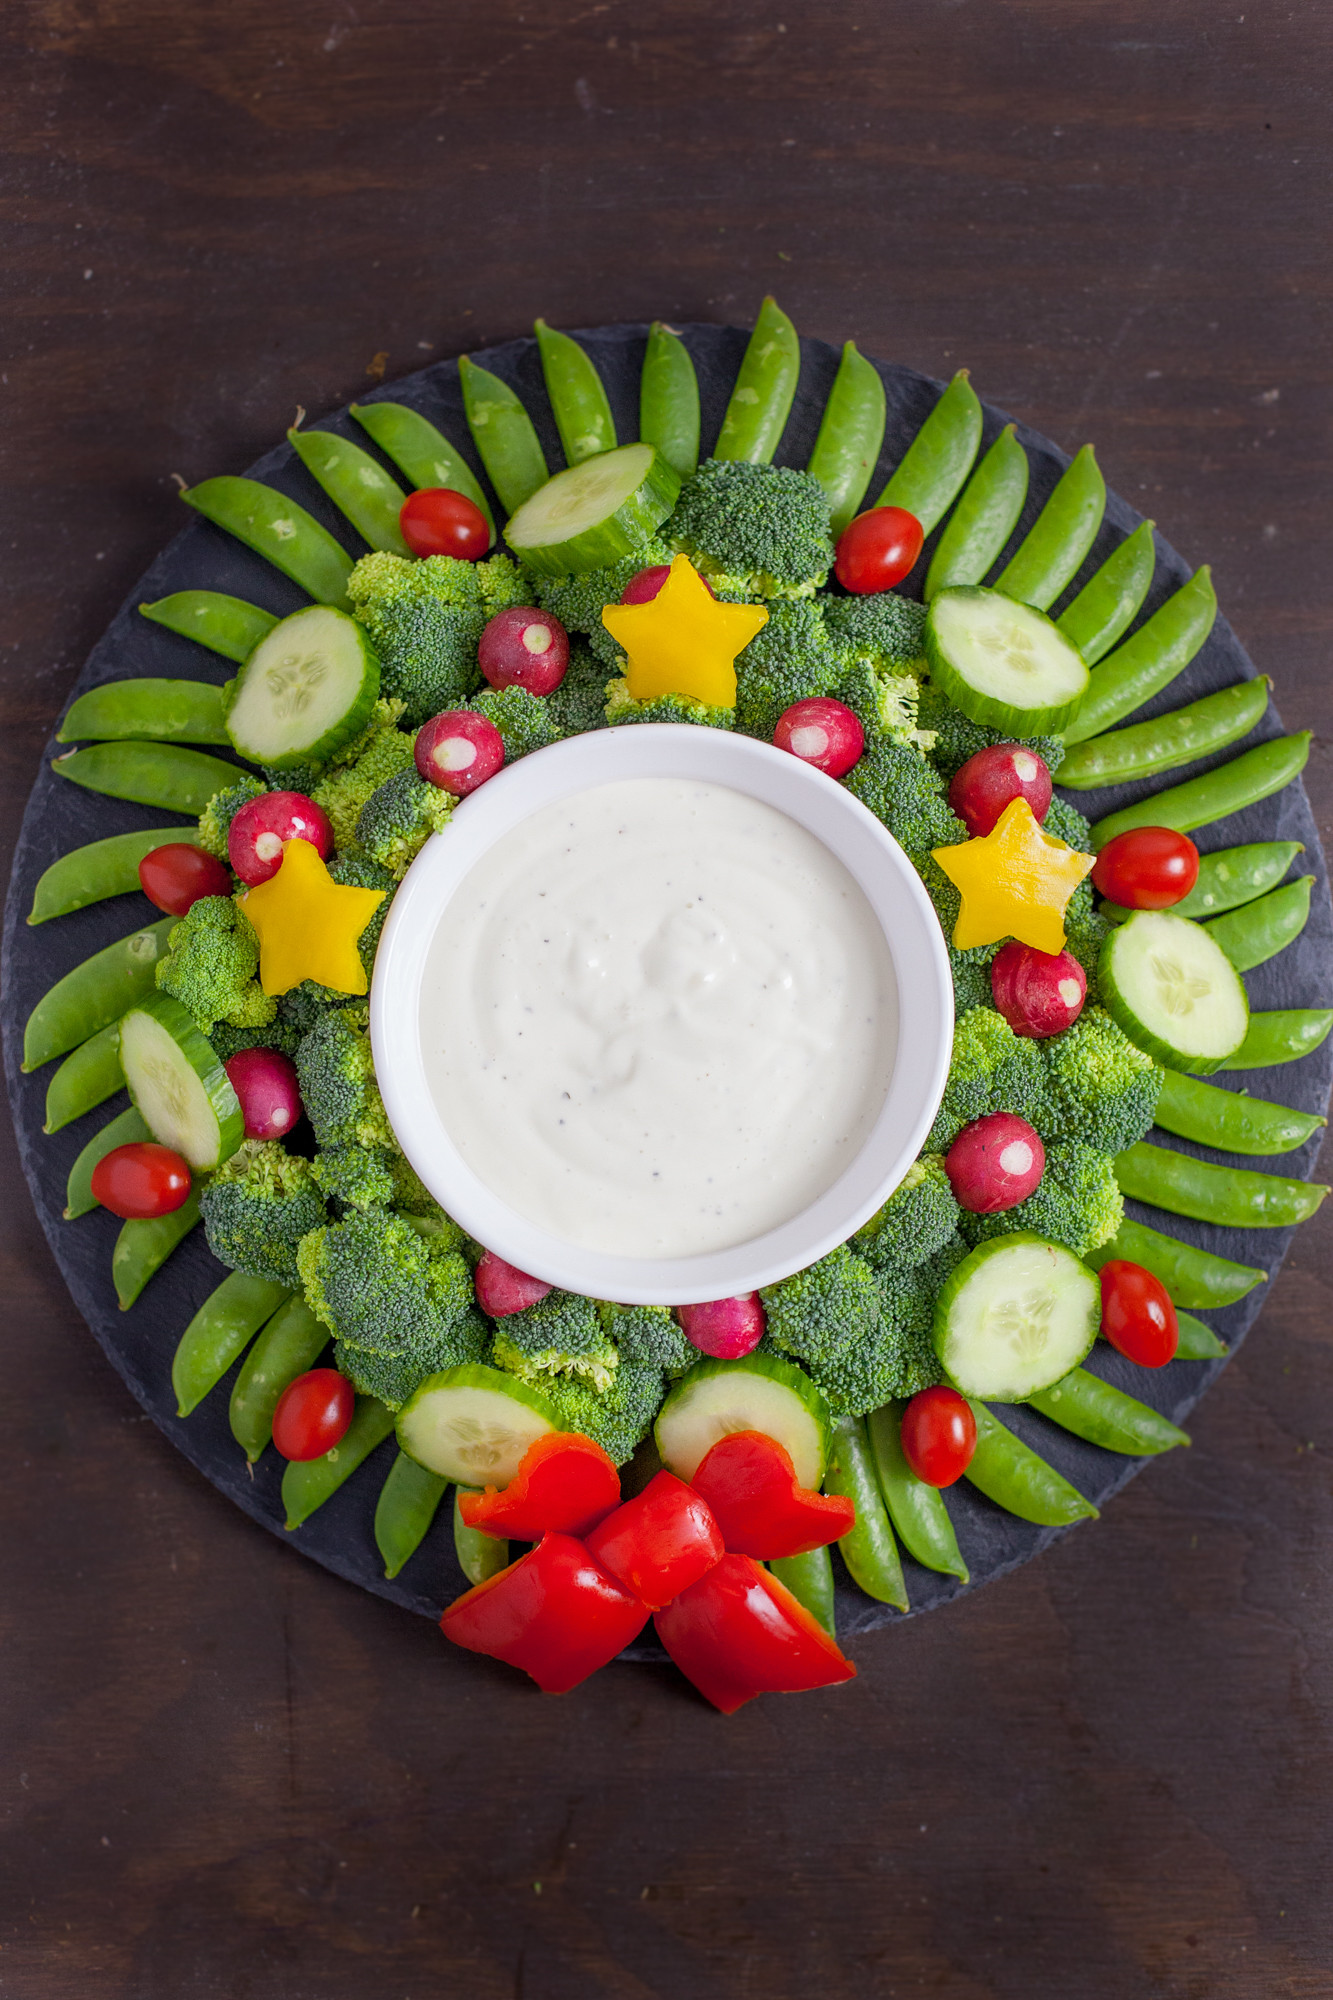 Cute Christmas Appetizers
 Veggie Wreath Cute Christmas Appetizer Eating Richly